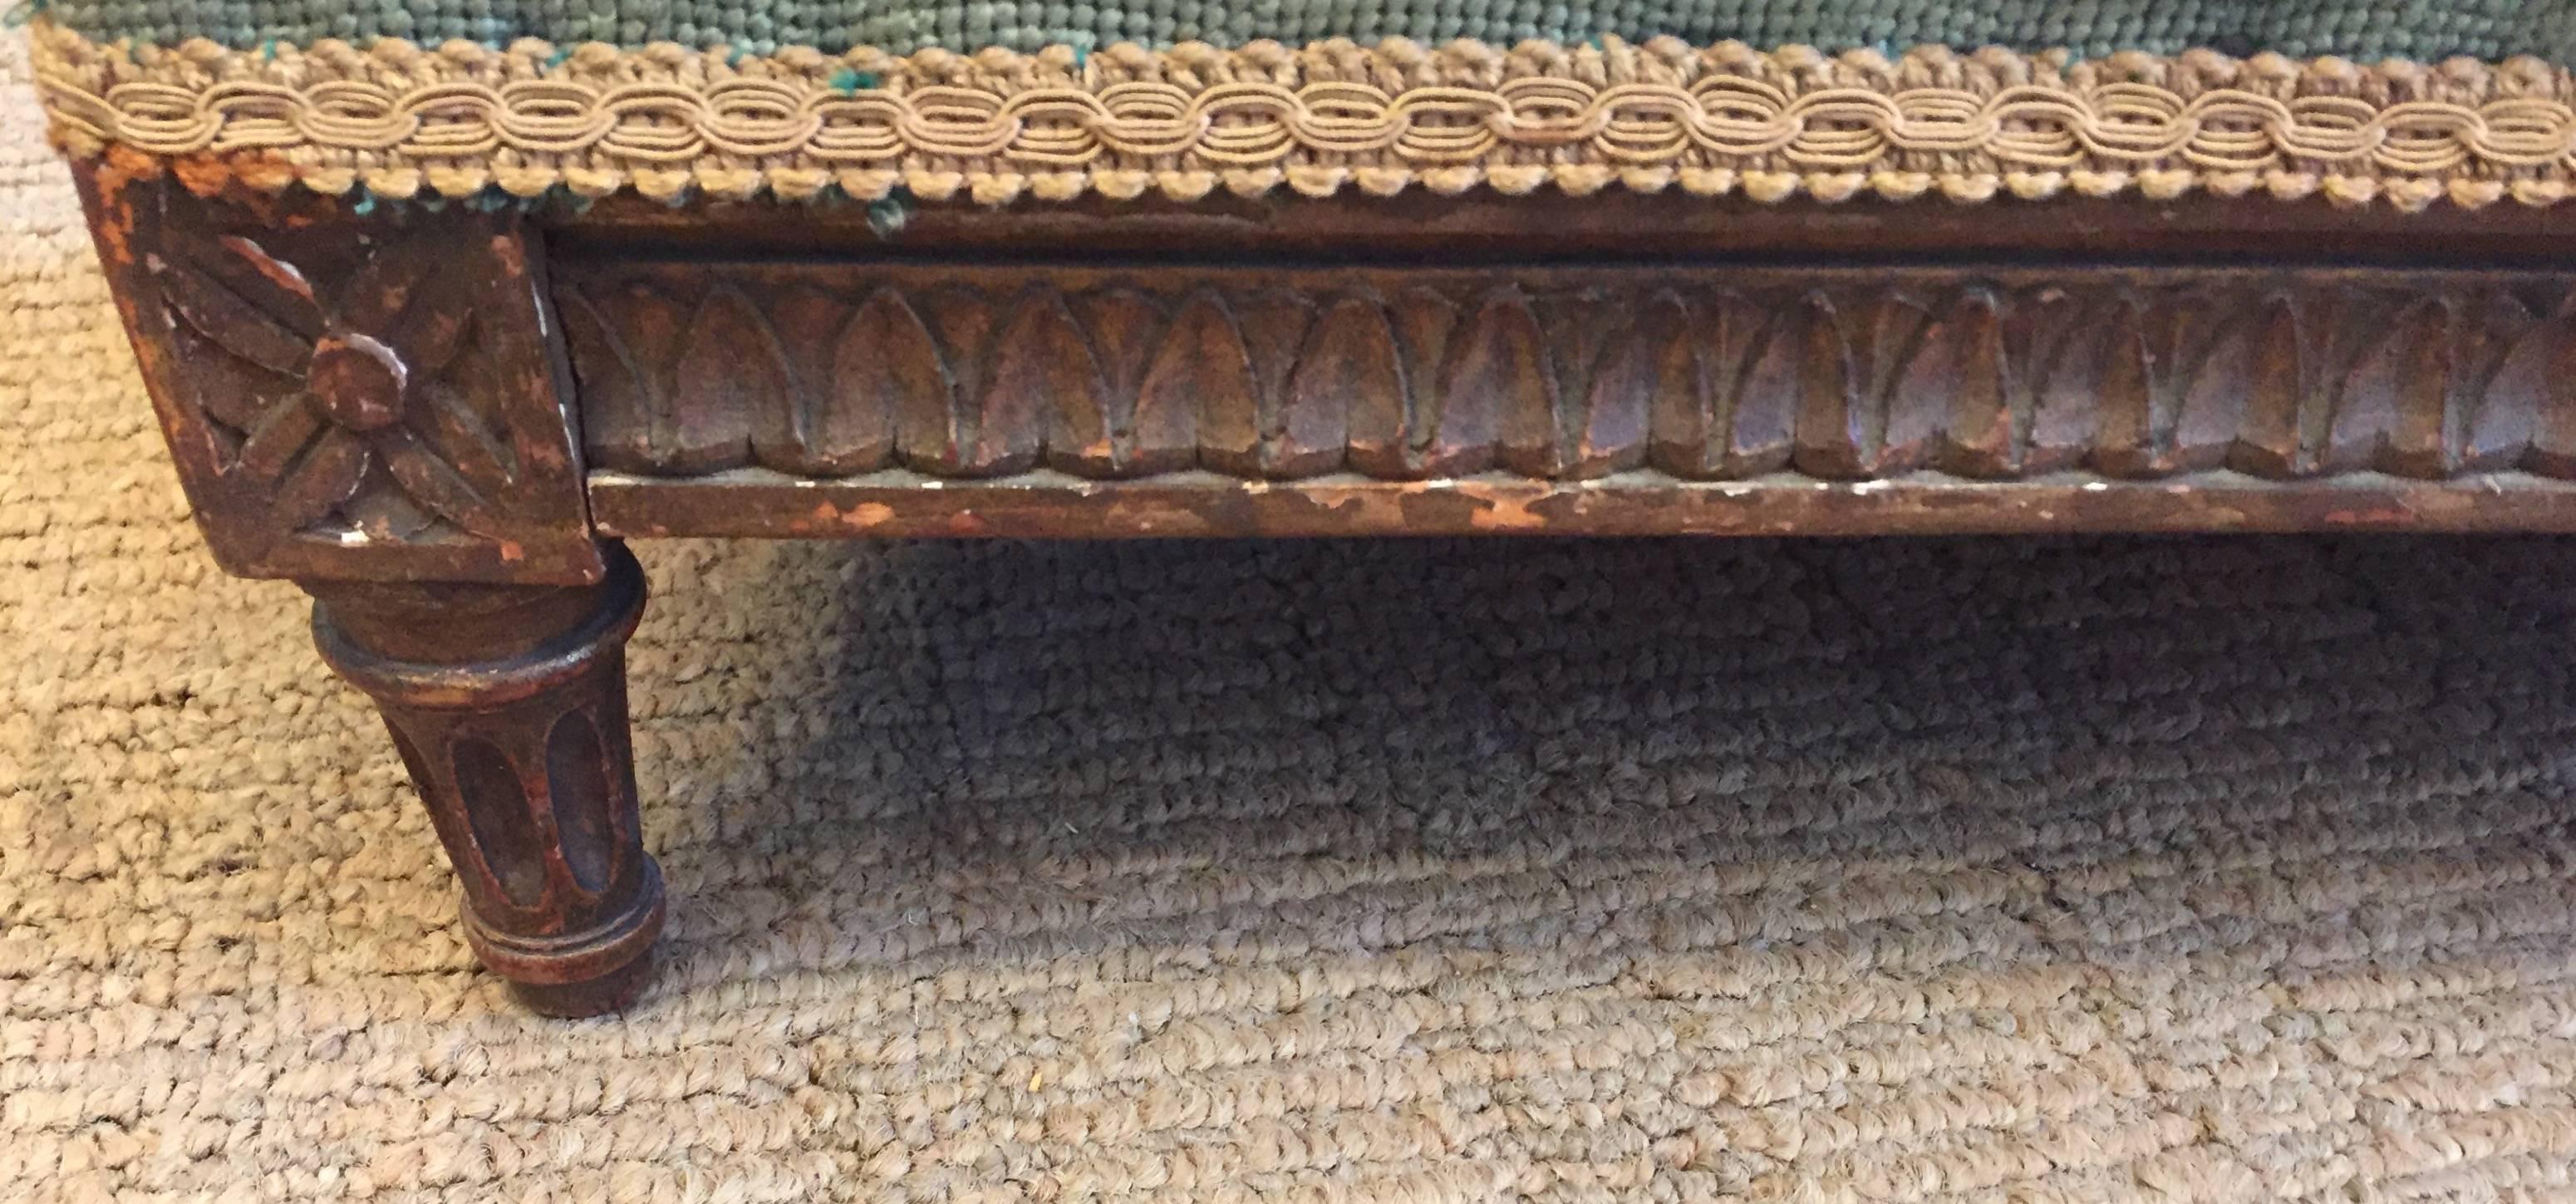 One of a kind gorgeous low narrow footstool or bench having a carved mahogany wood base with remnants of gold leafing and to die for original fabric with intricate hand done beadwork.